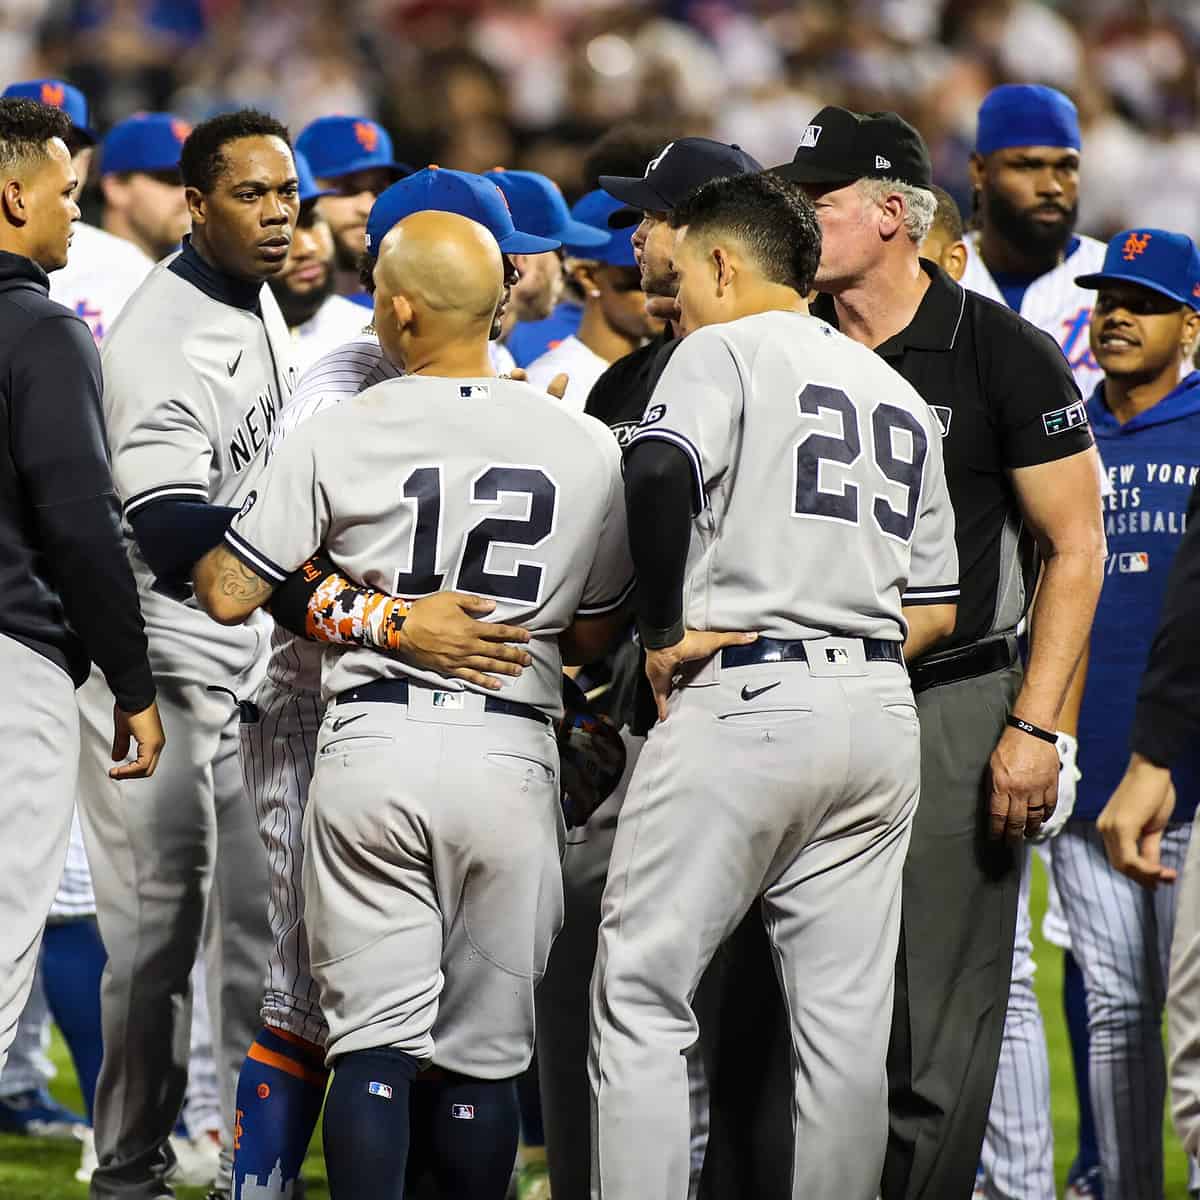 Looking back at only Mets-Yankees World Series